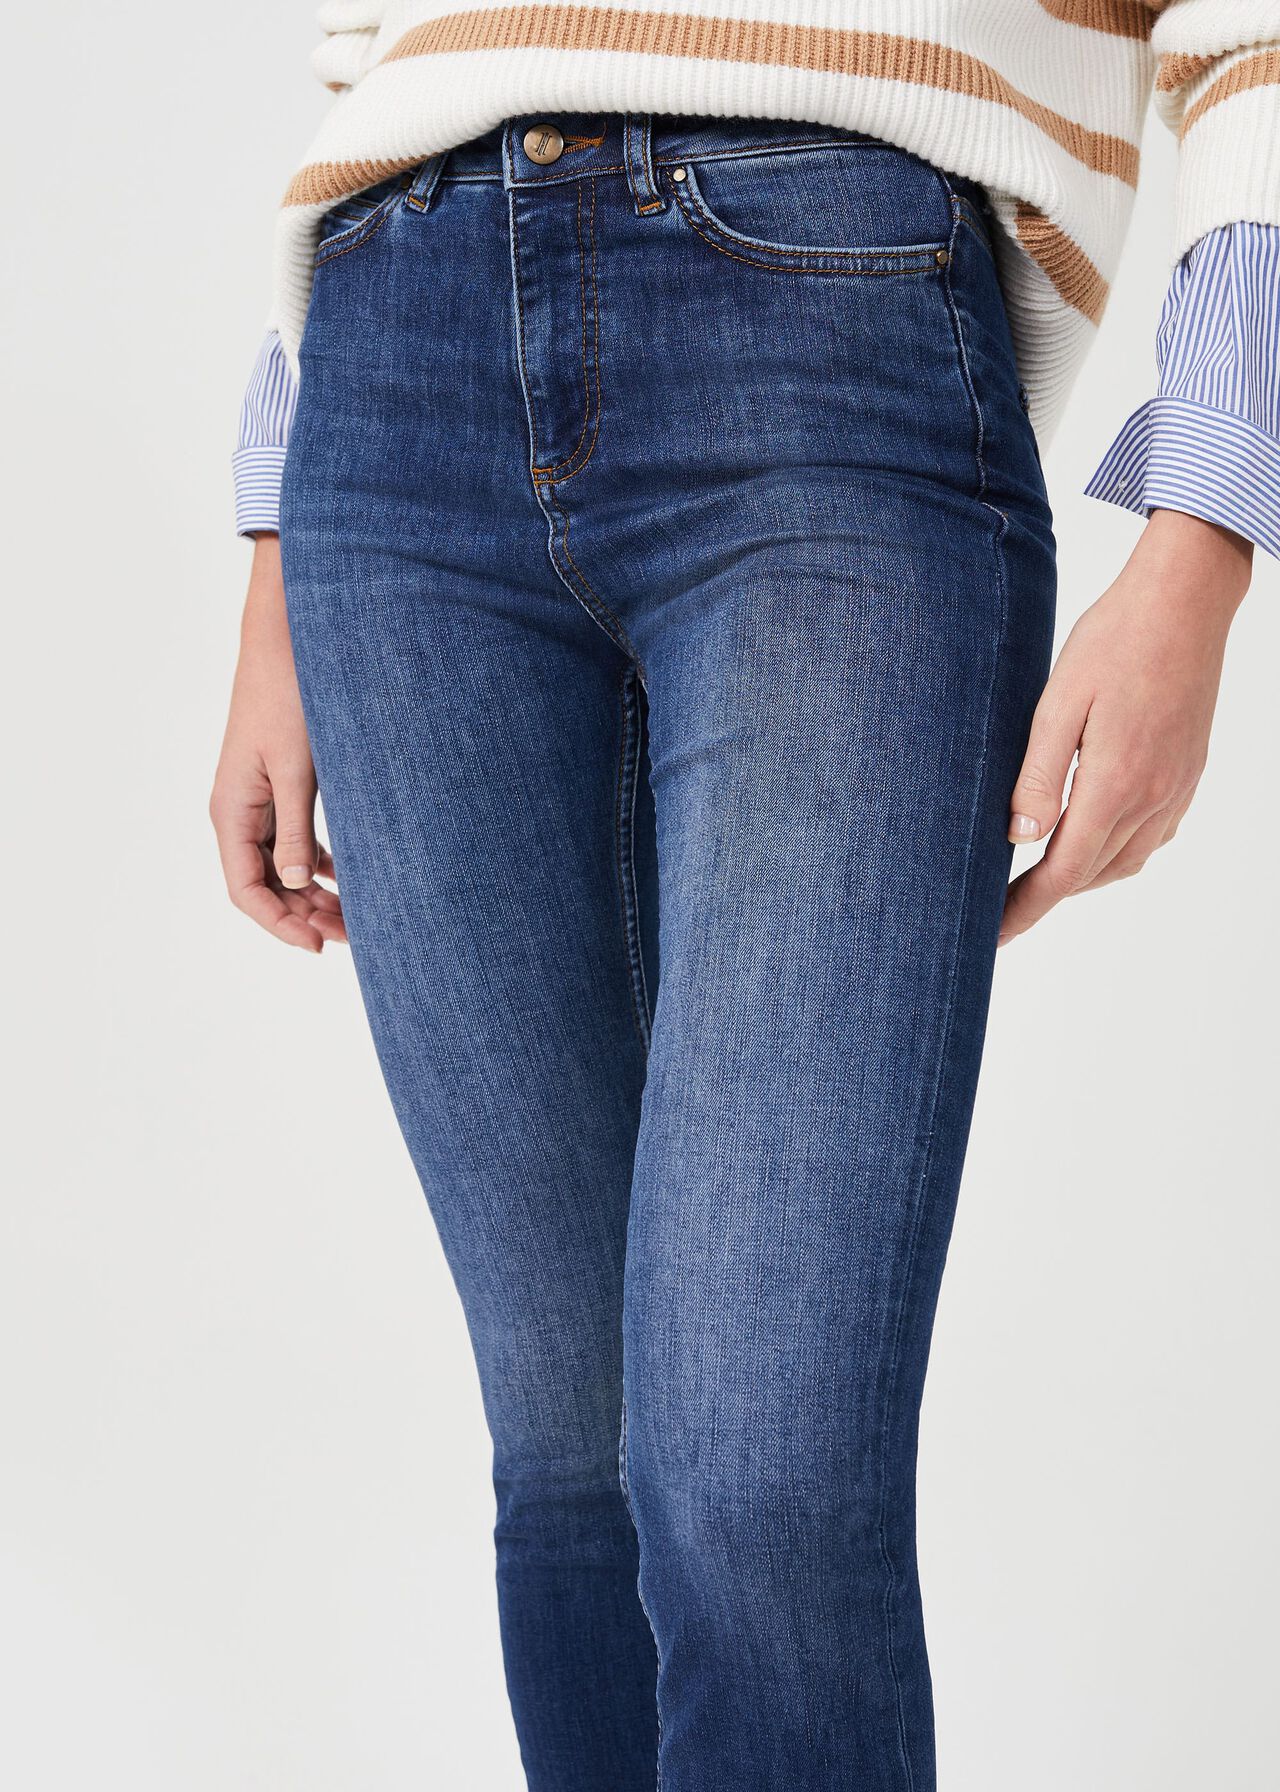 Gia Sculpting Jean With Stretch, Mid Wash, hi-res